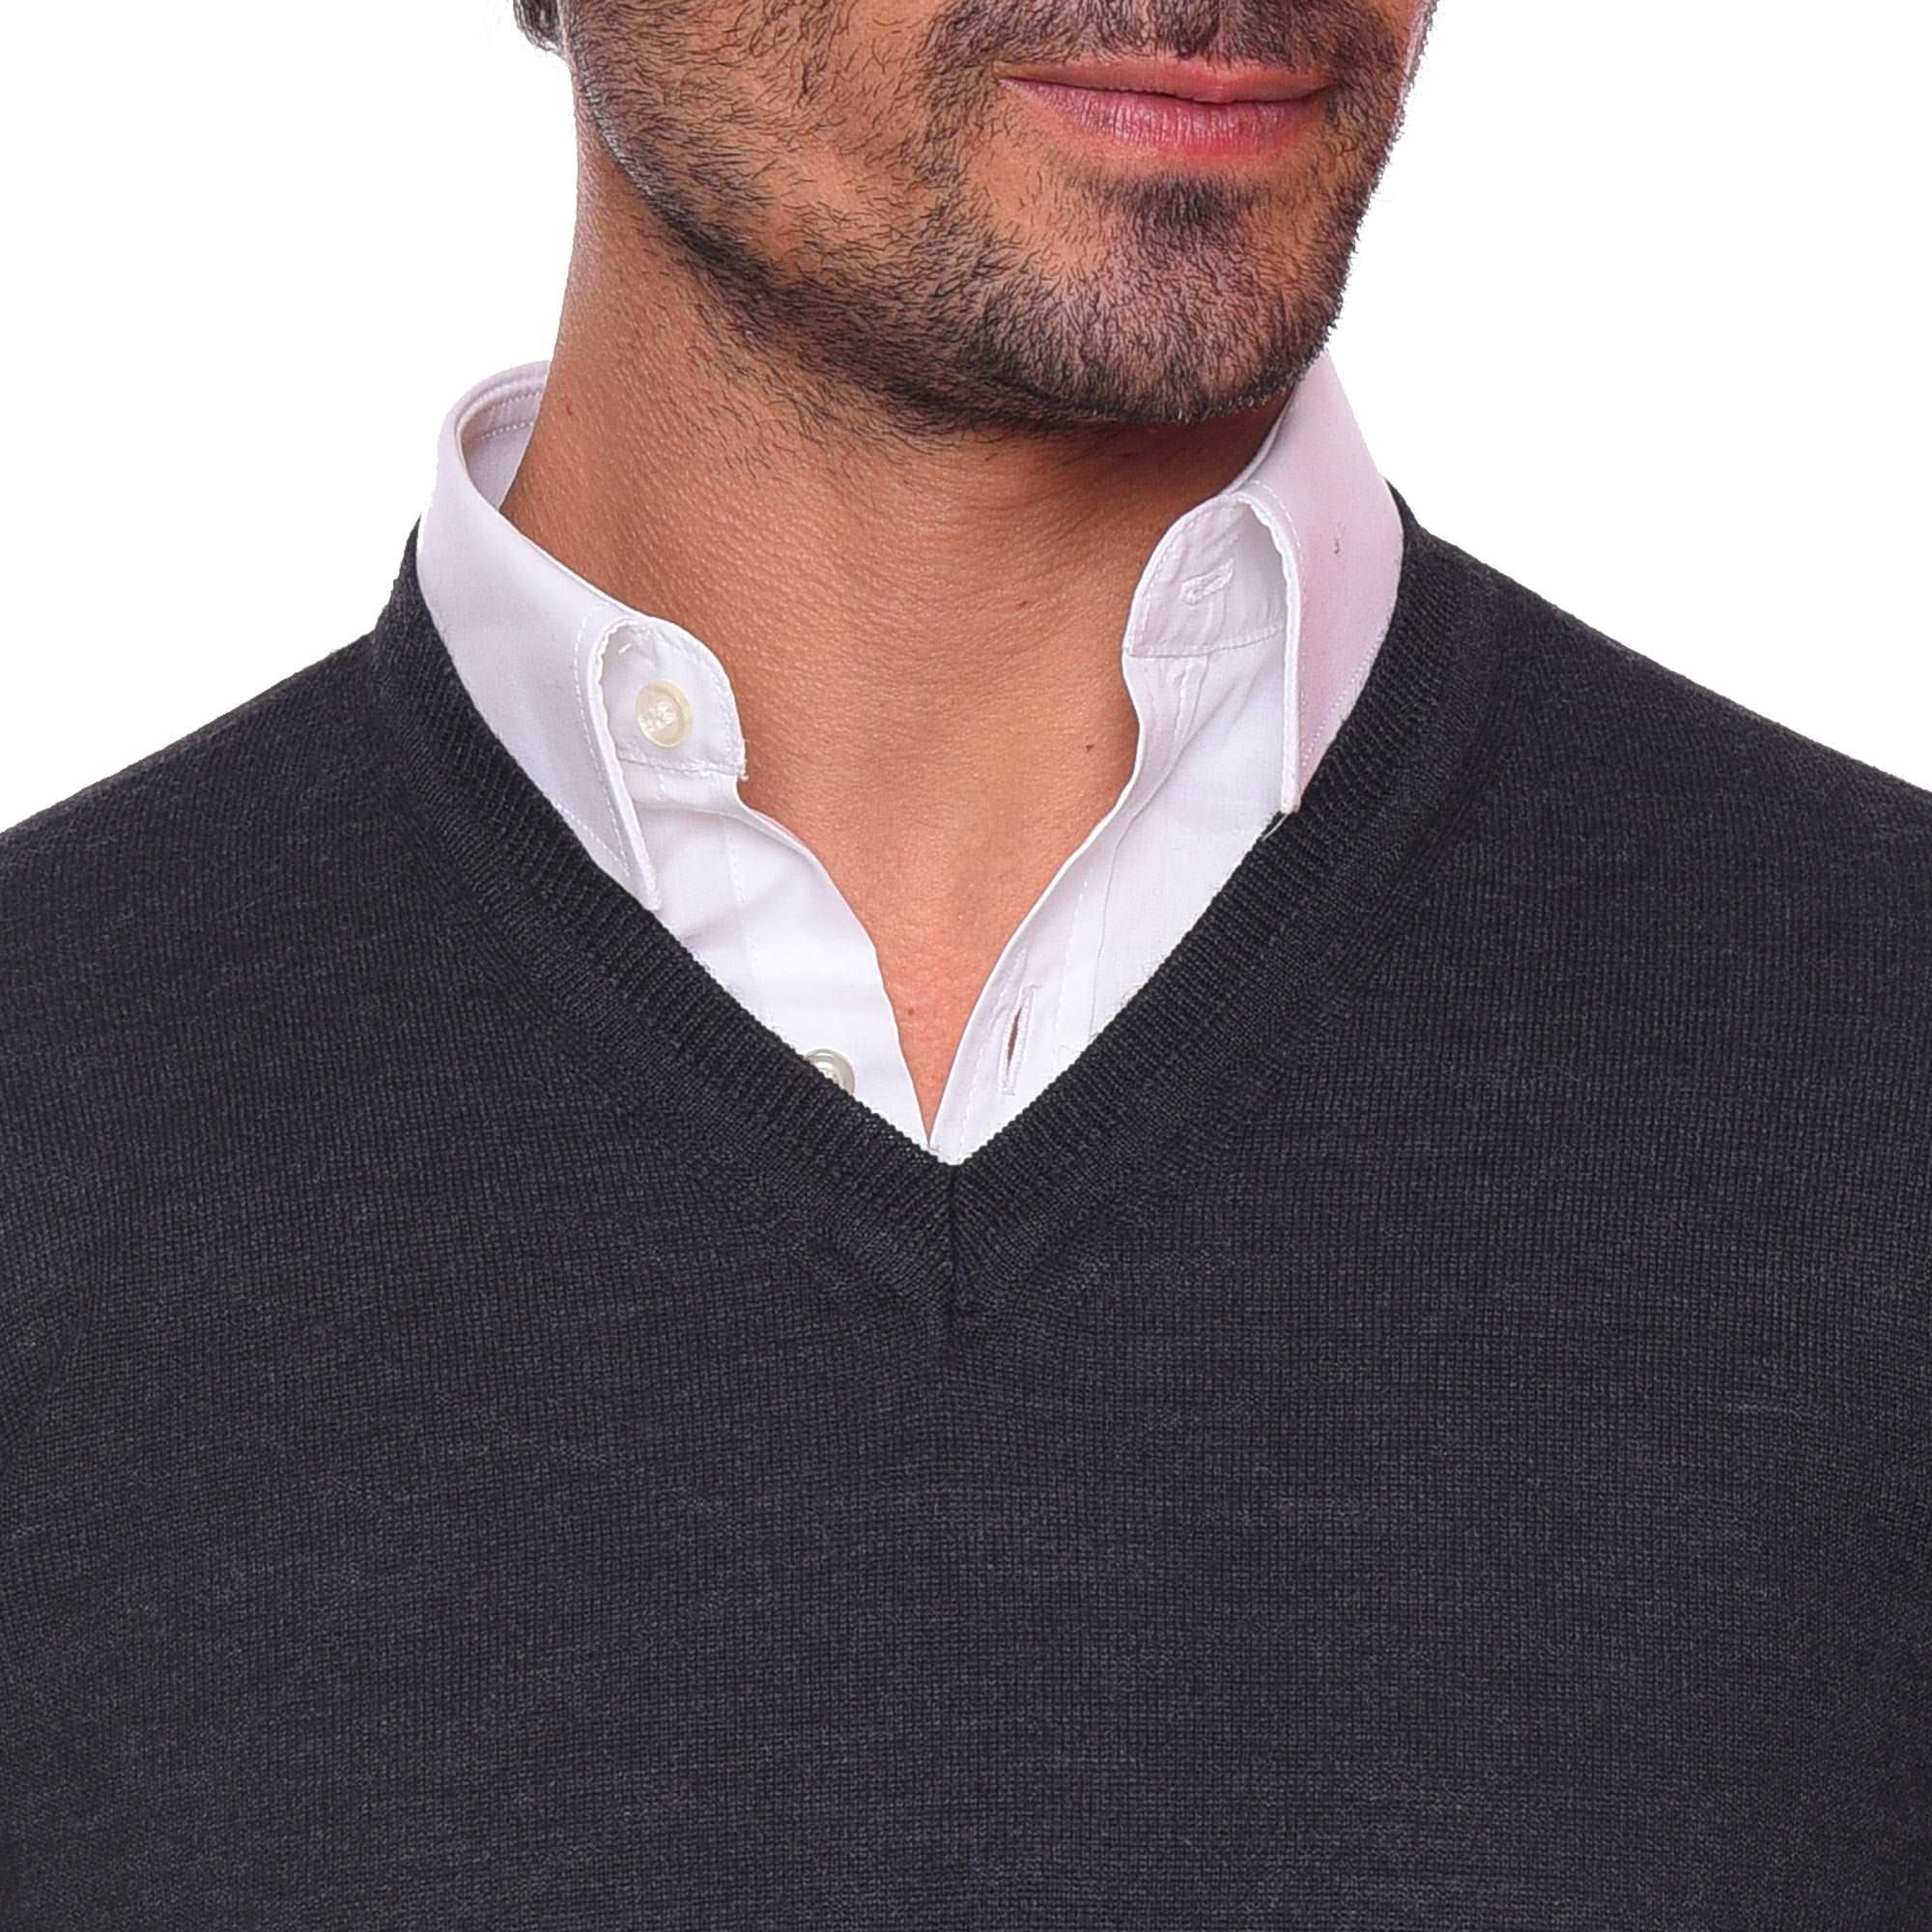 Charcoal V-Neck Pullover(mplbsc-05)